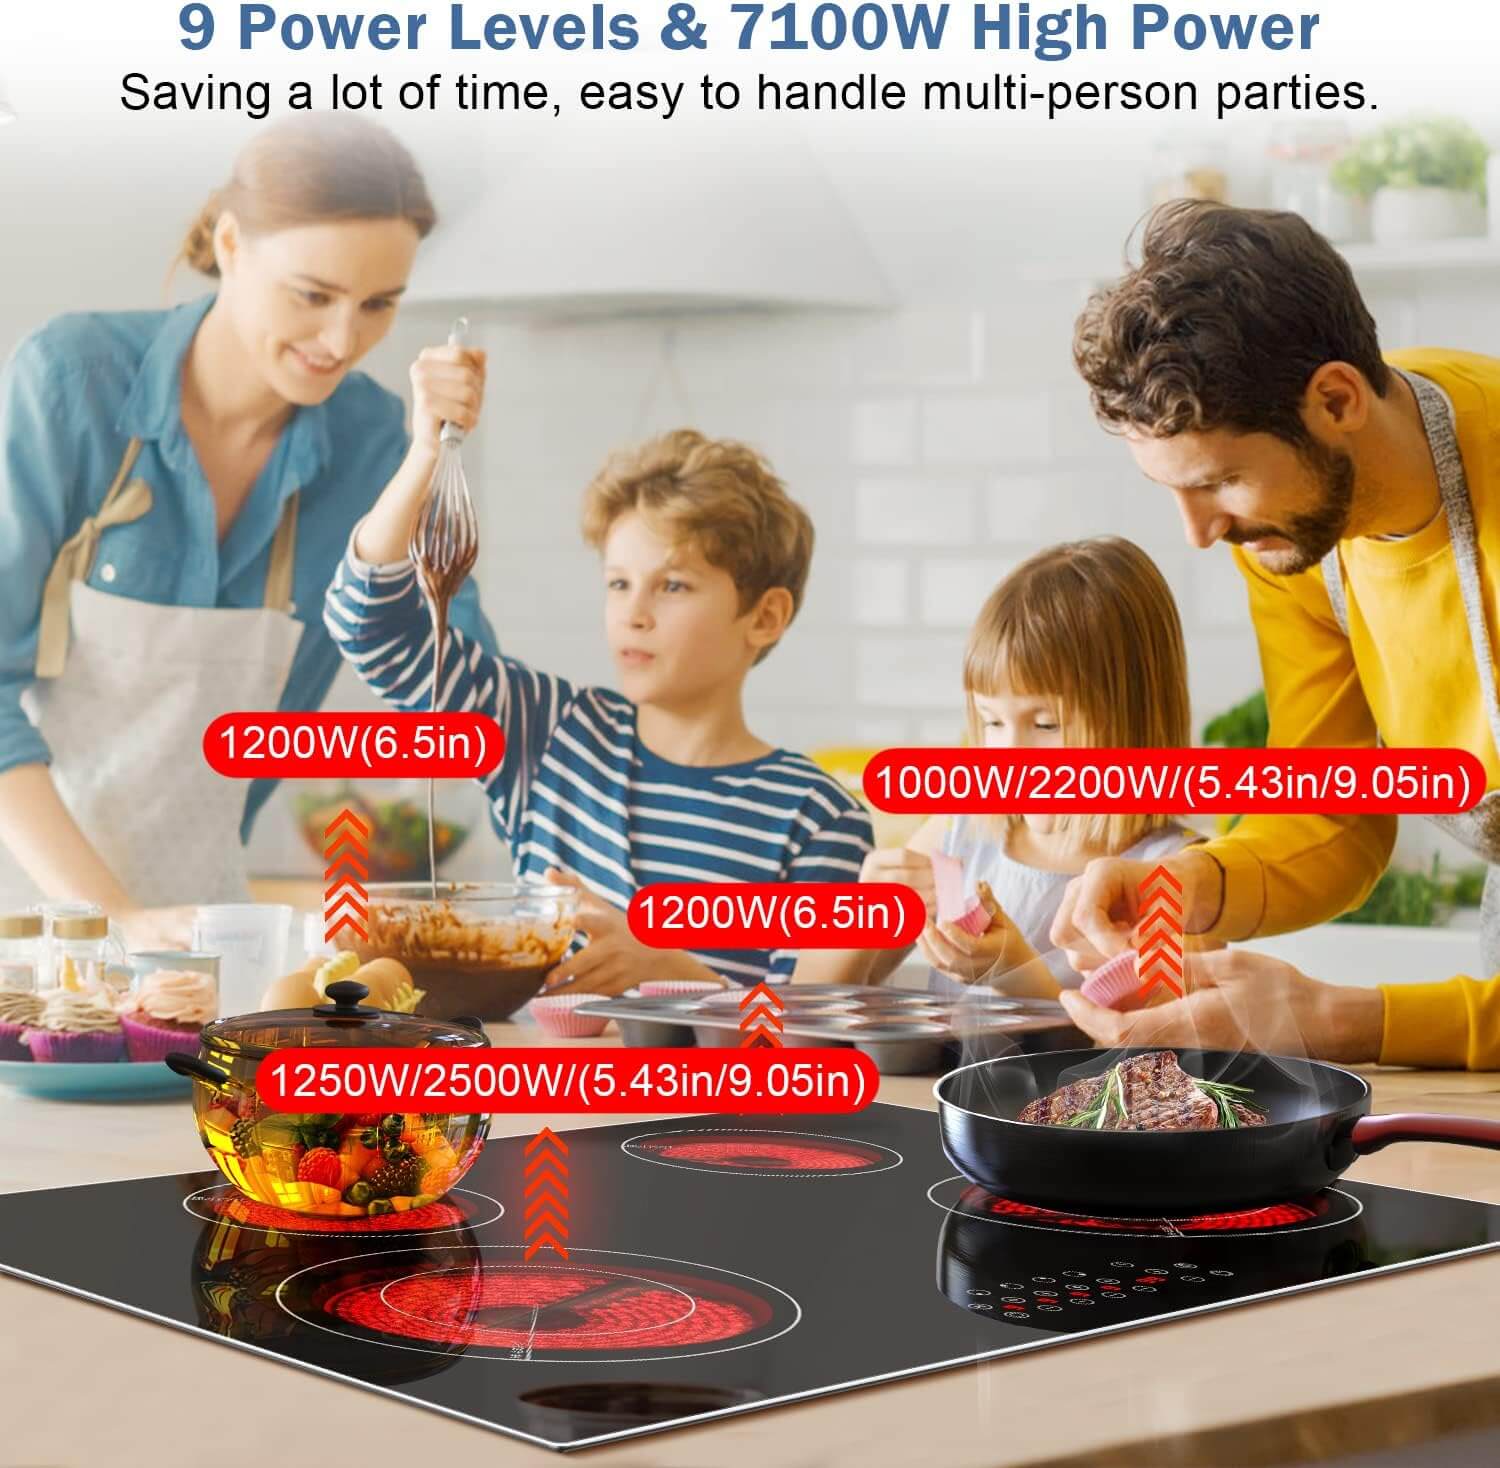 Built-in Induction Cooktop, 30 inch 4 Burners, 220V Ceramic Glass